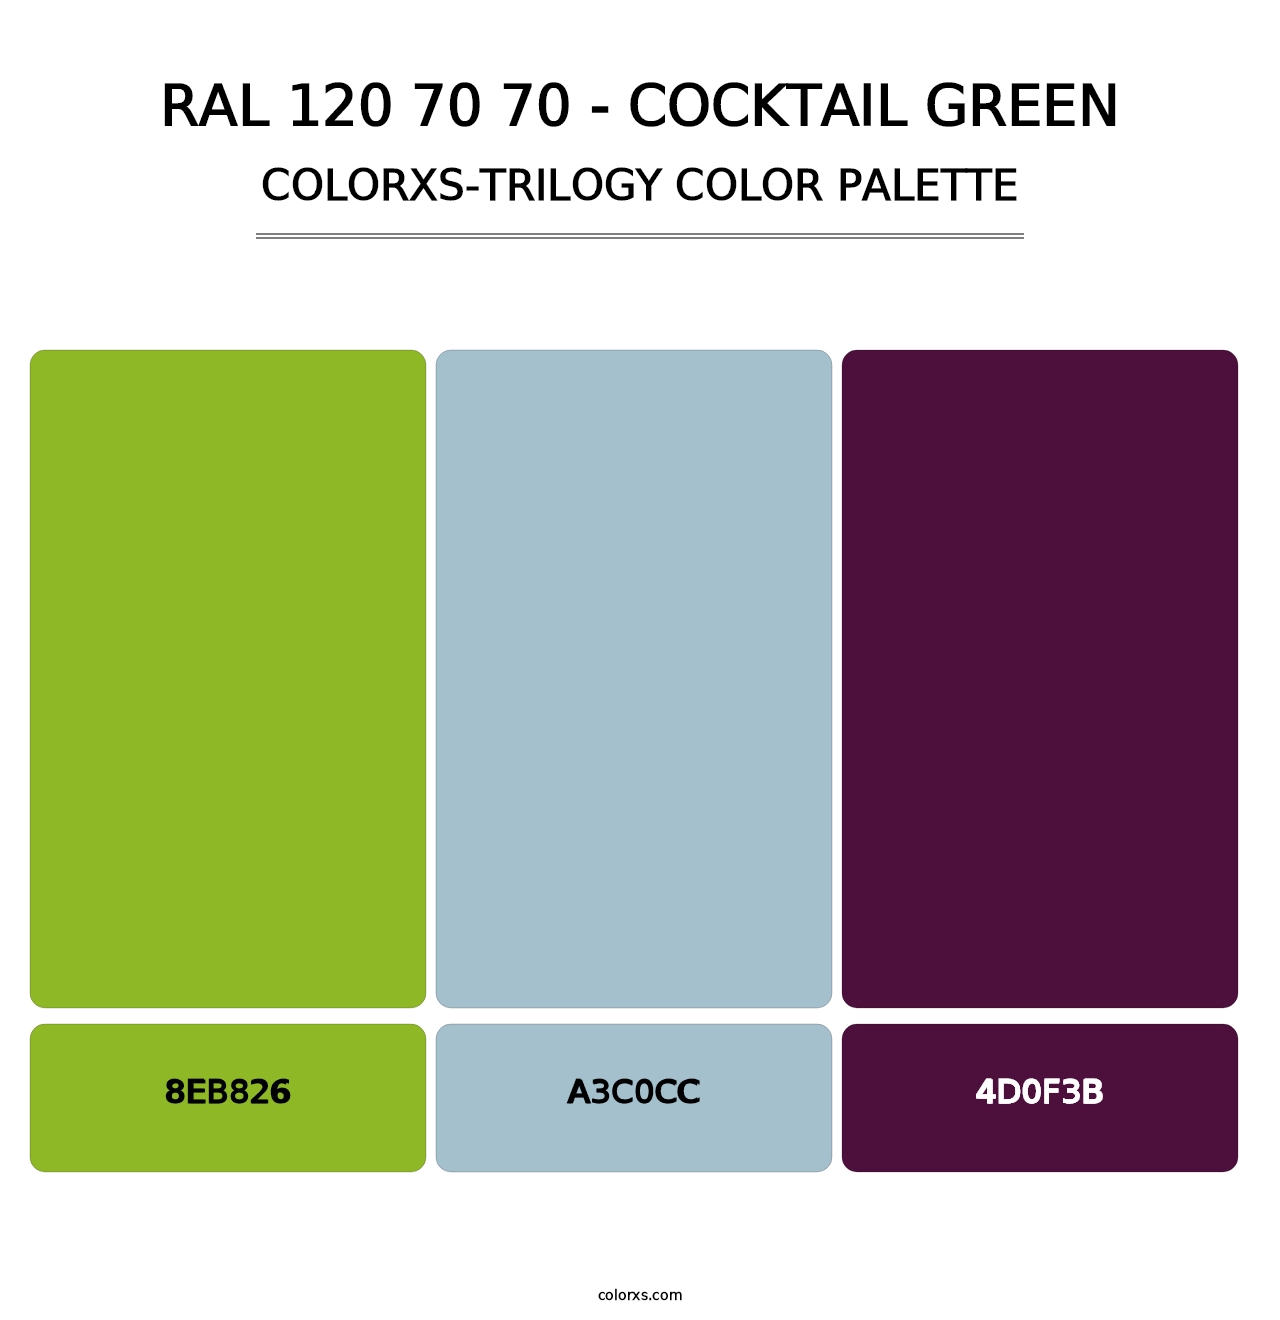 RAL 120 70 70 - Cocktail Green - Colorxs Trilogy Palette